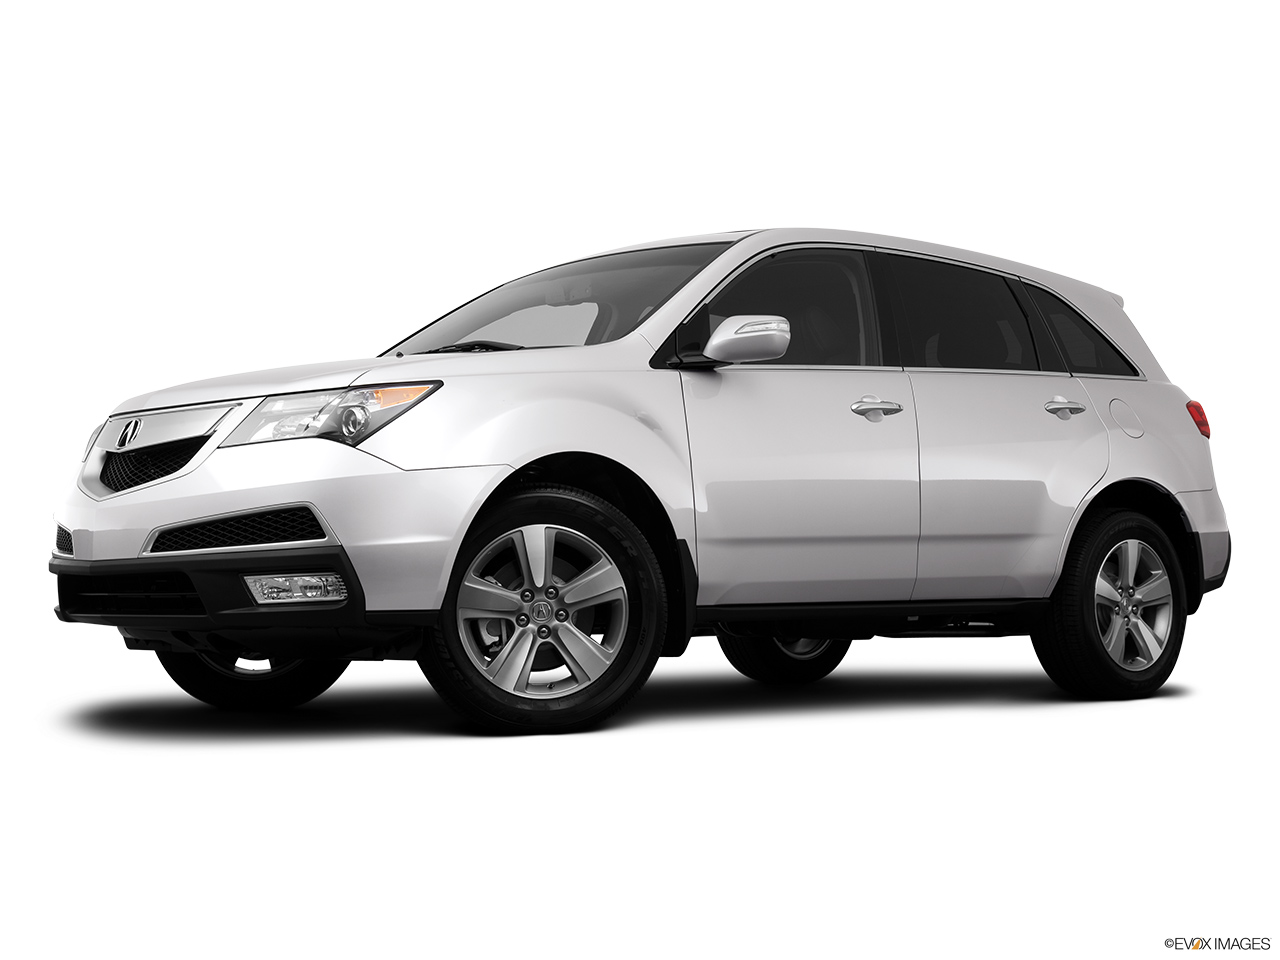 2013 Acura MDX Base Low/wide front 5/8. 